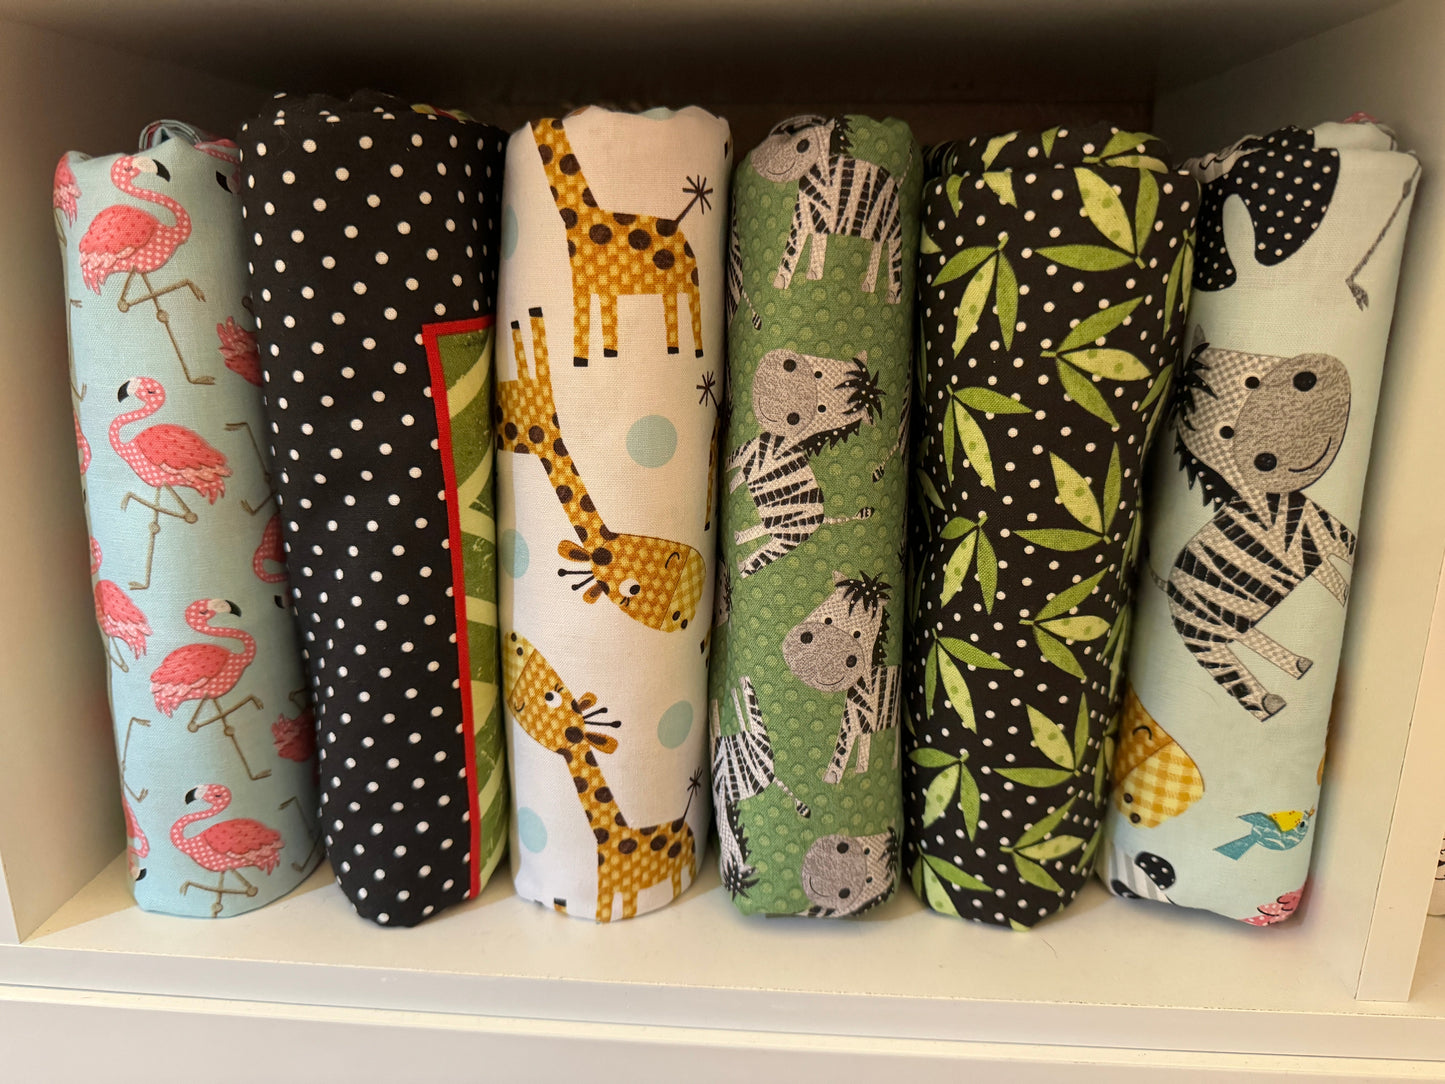 Studio E Fabric Bundle At The Zoo 1 yard Fabric Bundle, 9 cotton quilting fabrics & 1 panel, includes 9 yards and 1 panel